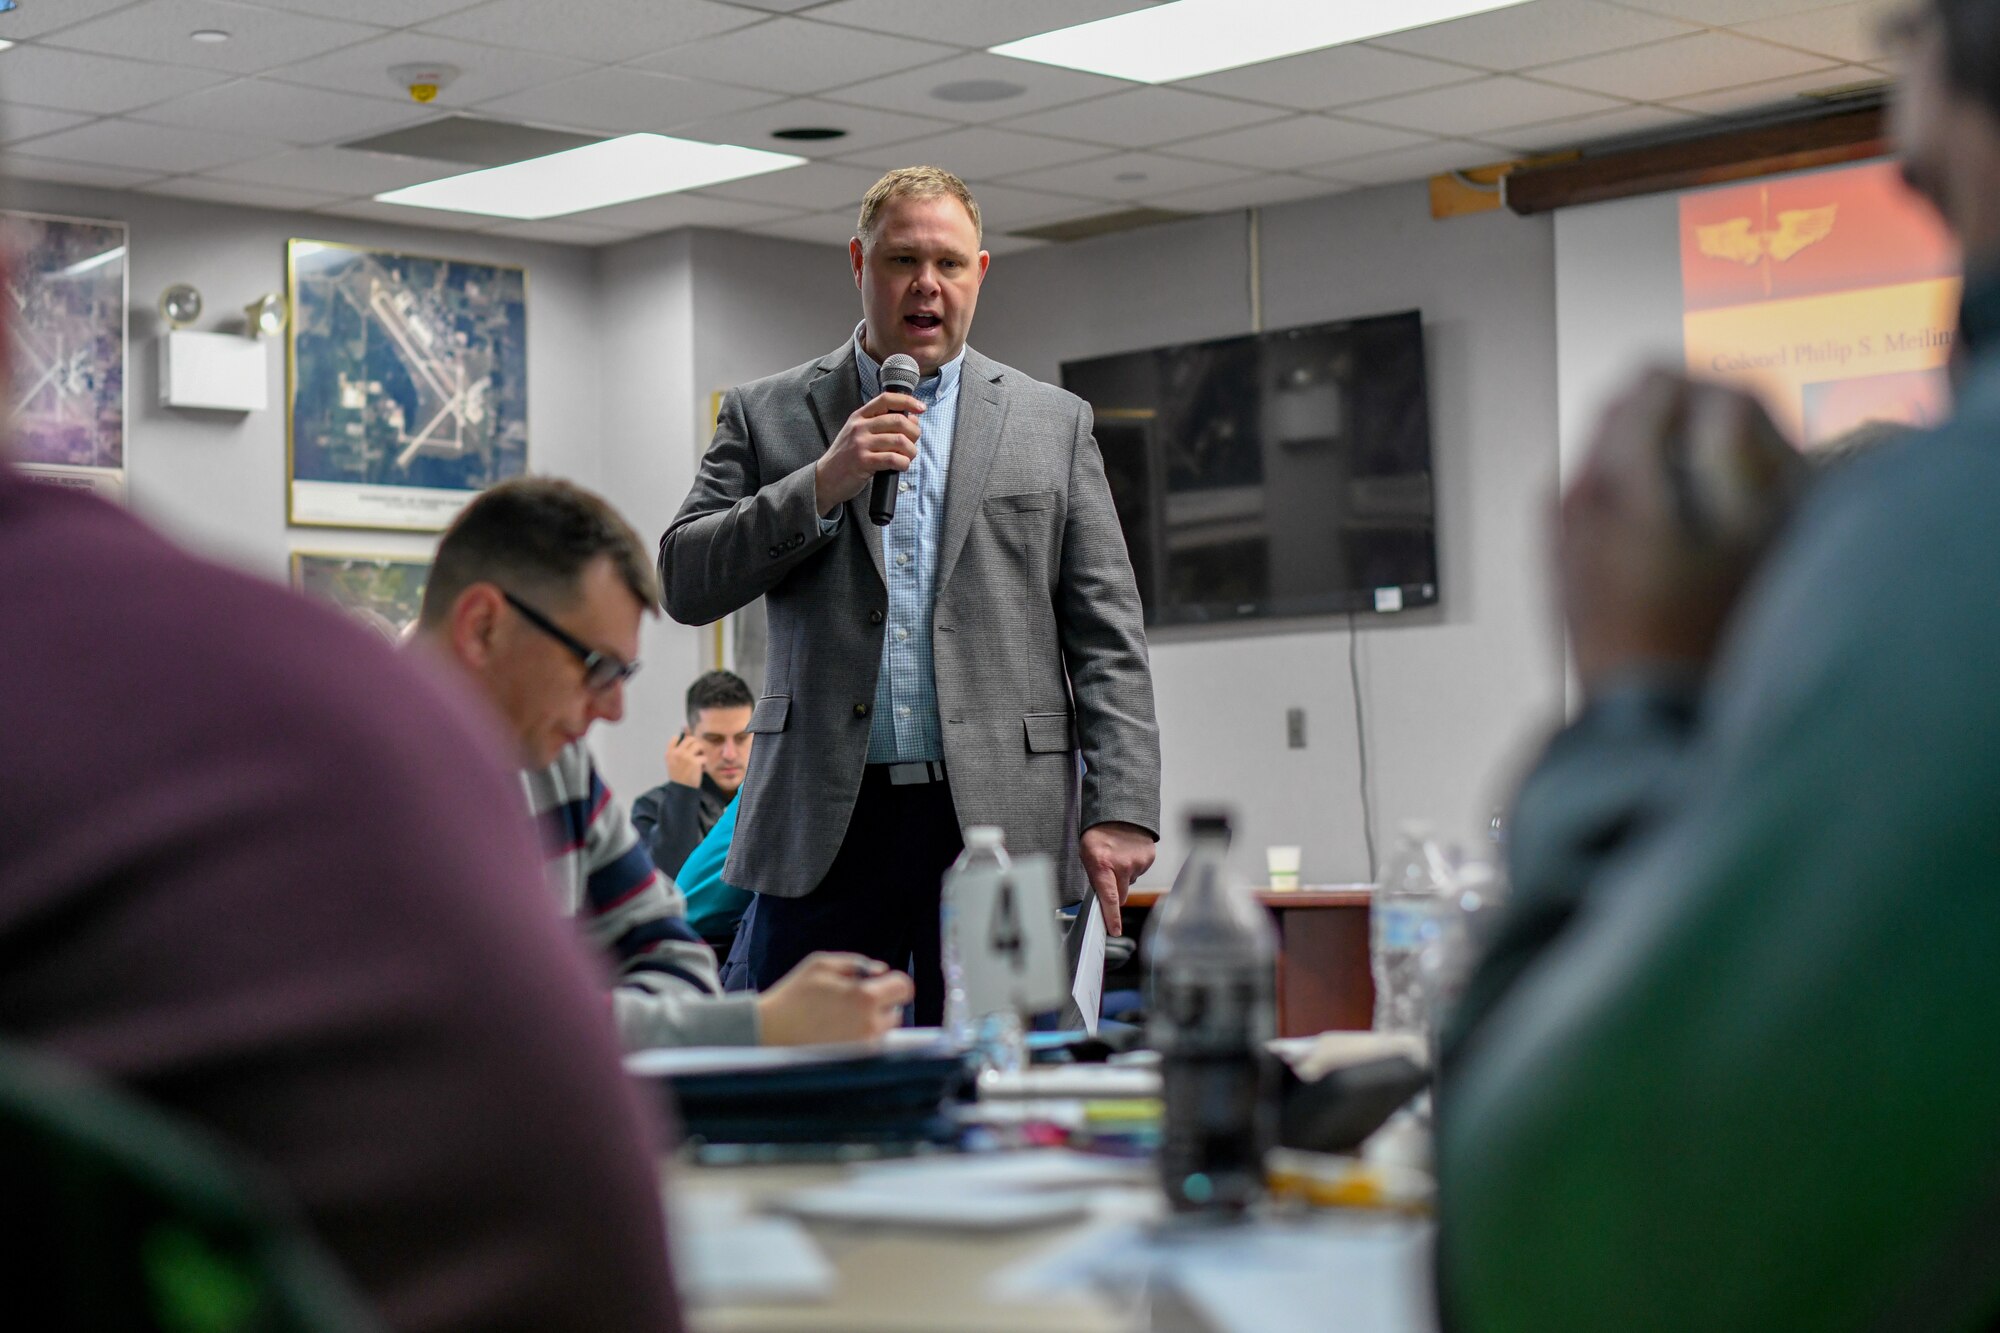 The Flight Commander's Edge is a multi-day workshop for enlisted and officer leaders at the 910th Airlift Wing to develop flight-level leaders.